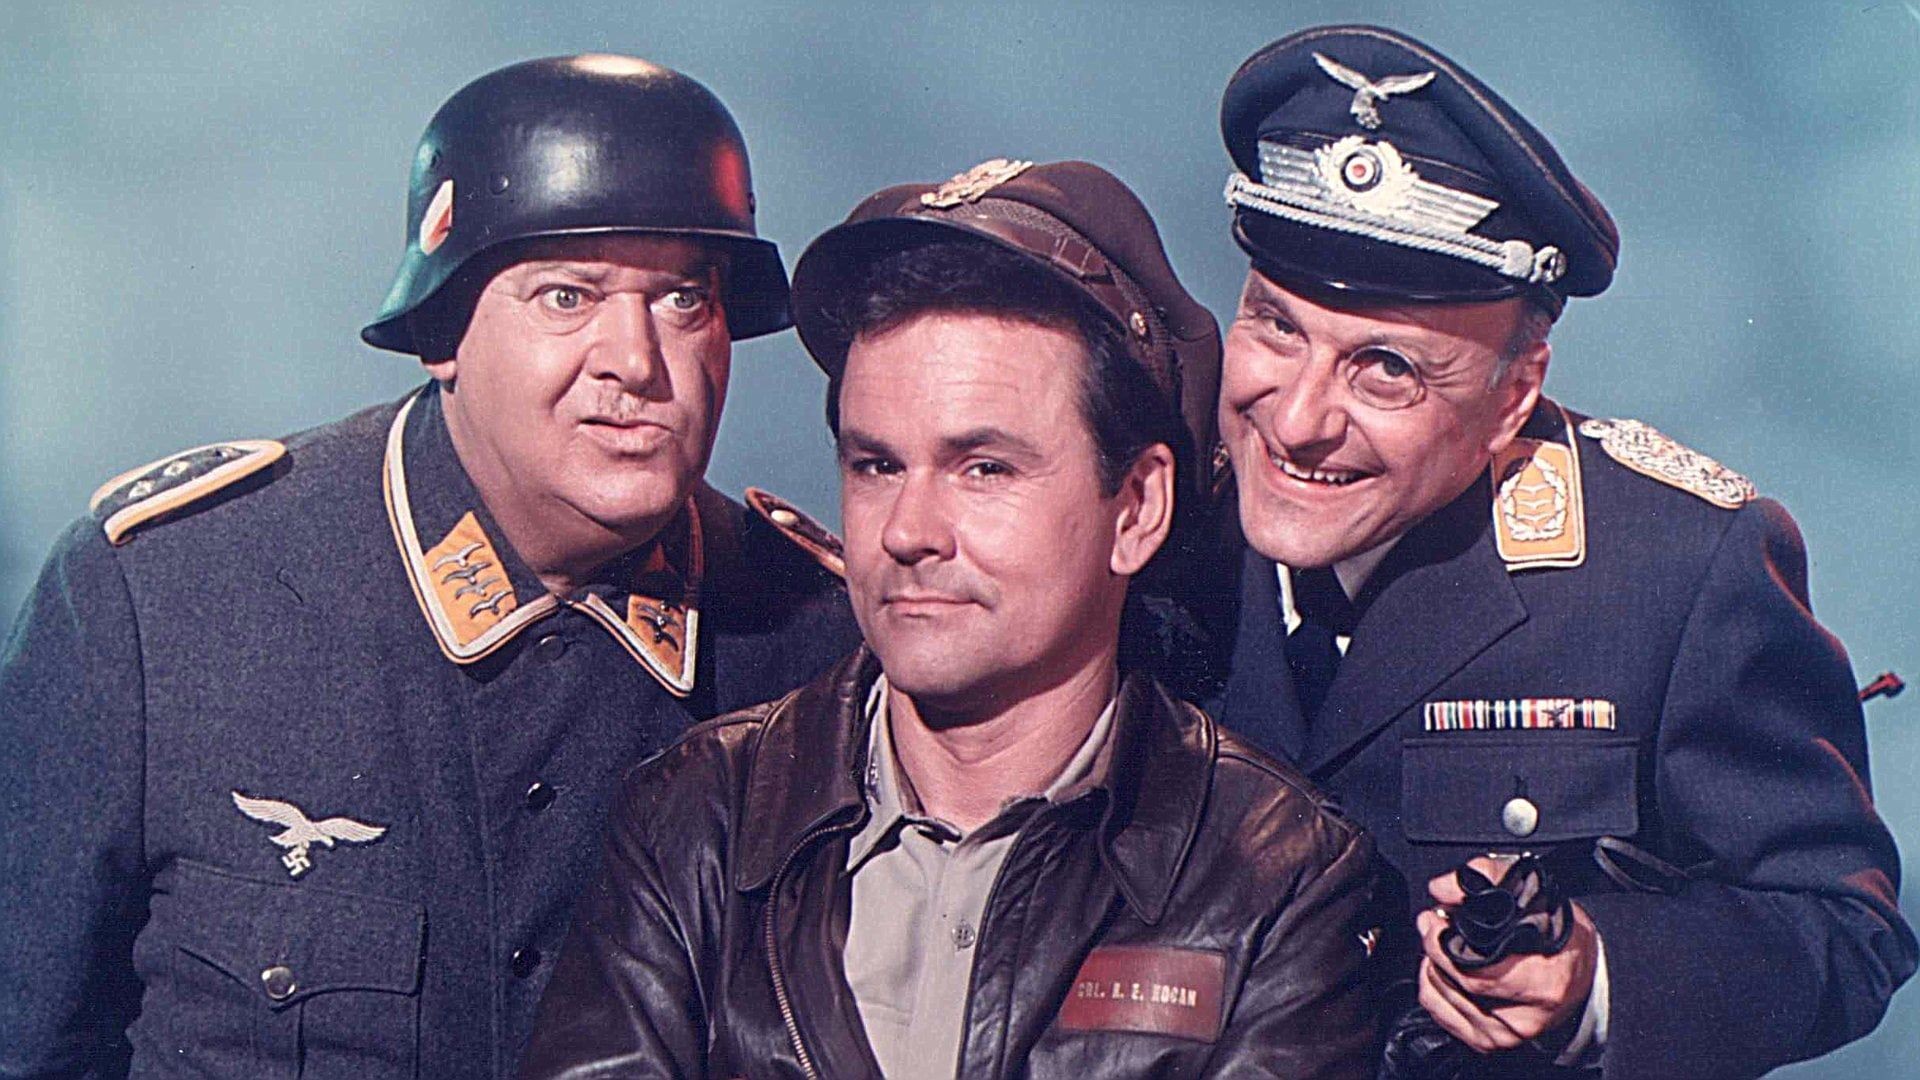 ⁣Hogan's Heroes - Top Hat, White Tie and Bomb Sights